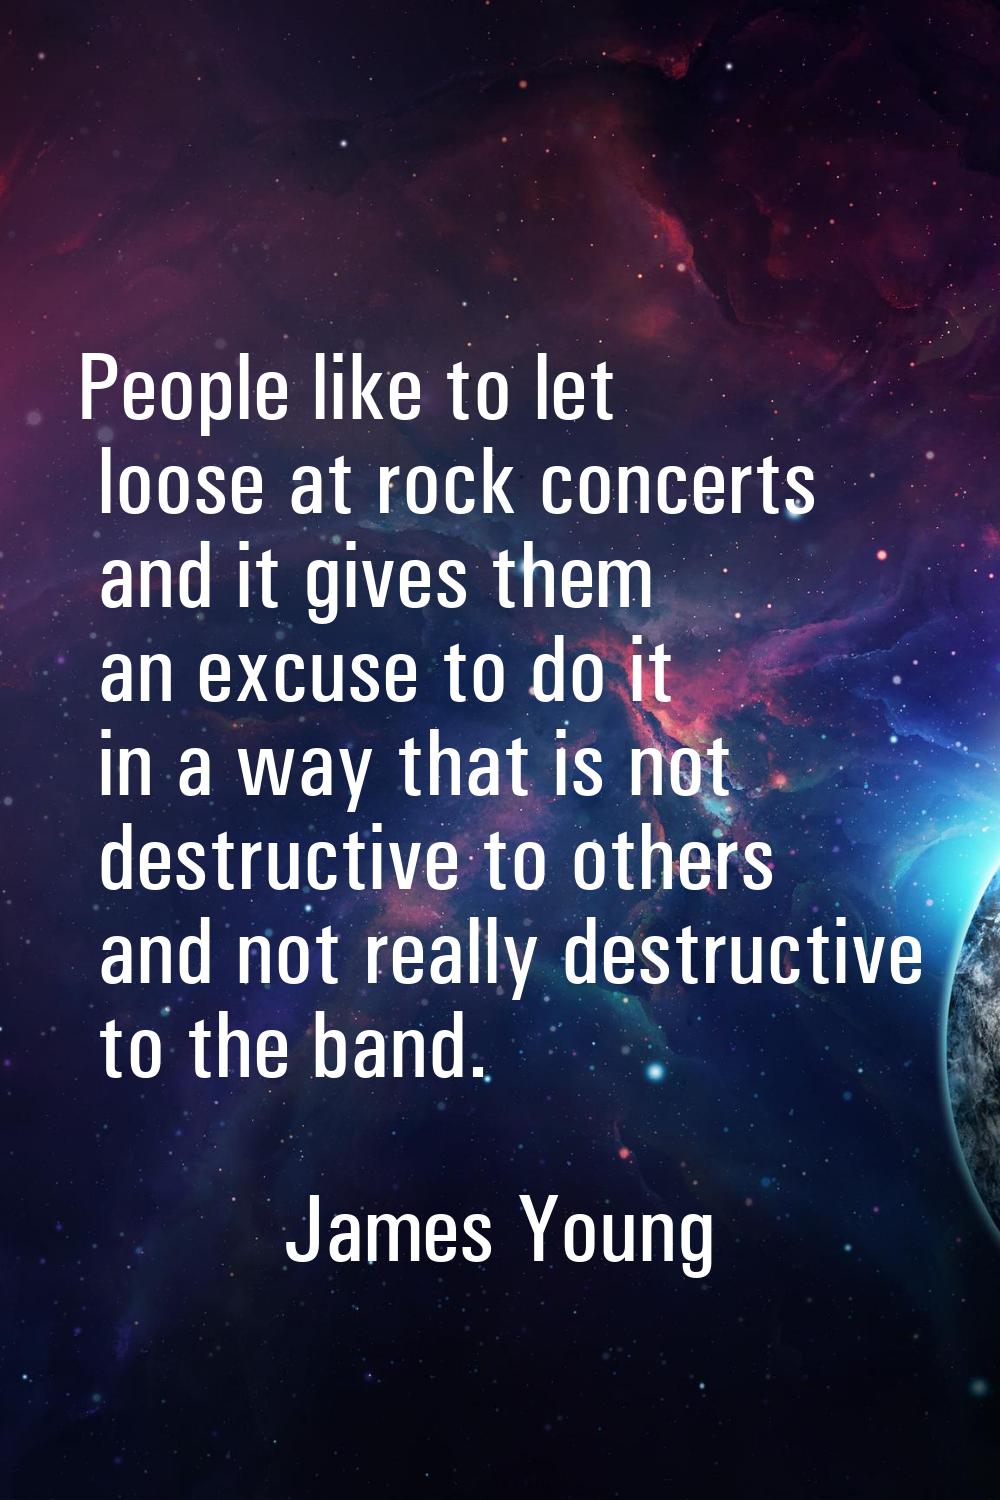 People like to let loose at rock concerts and it gives them an excuse to do it in a way that is not